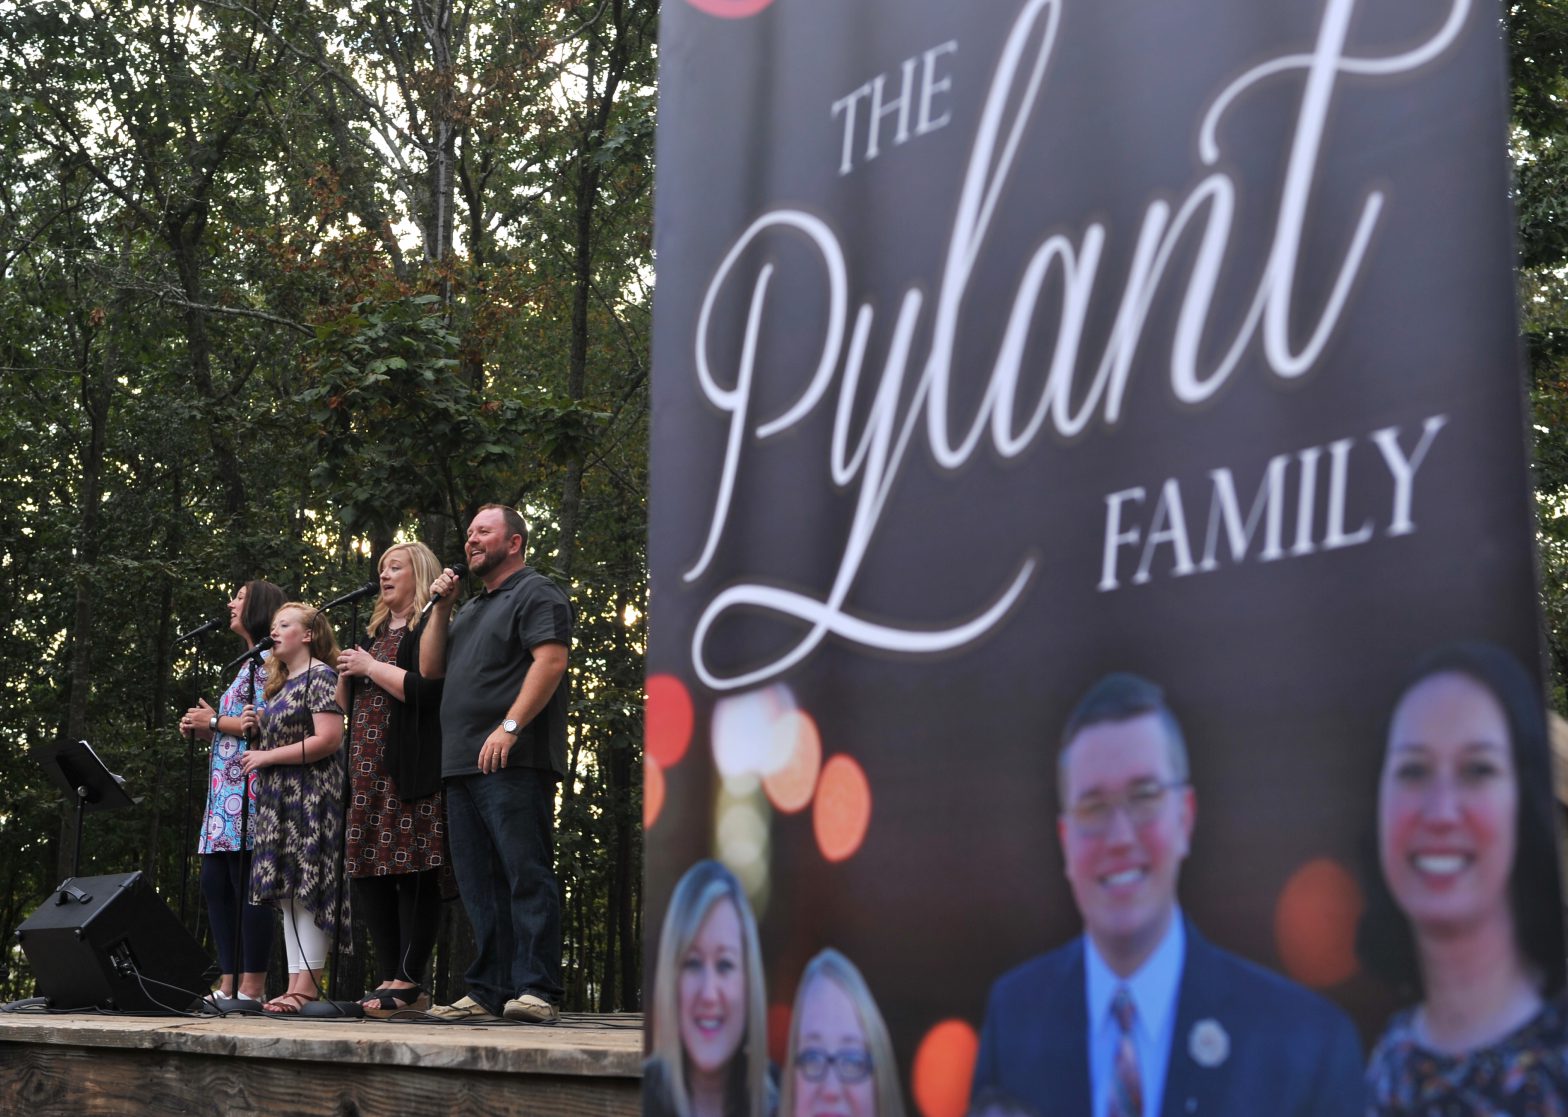 ‘Concerts in the Park’ series kicks off with The Pylant Family The